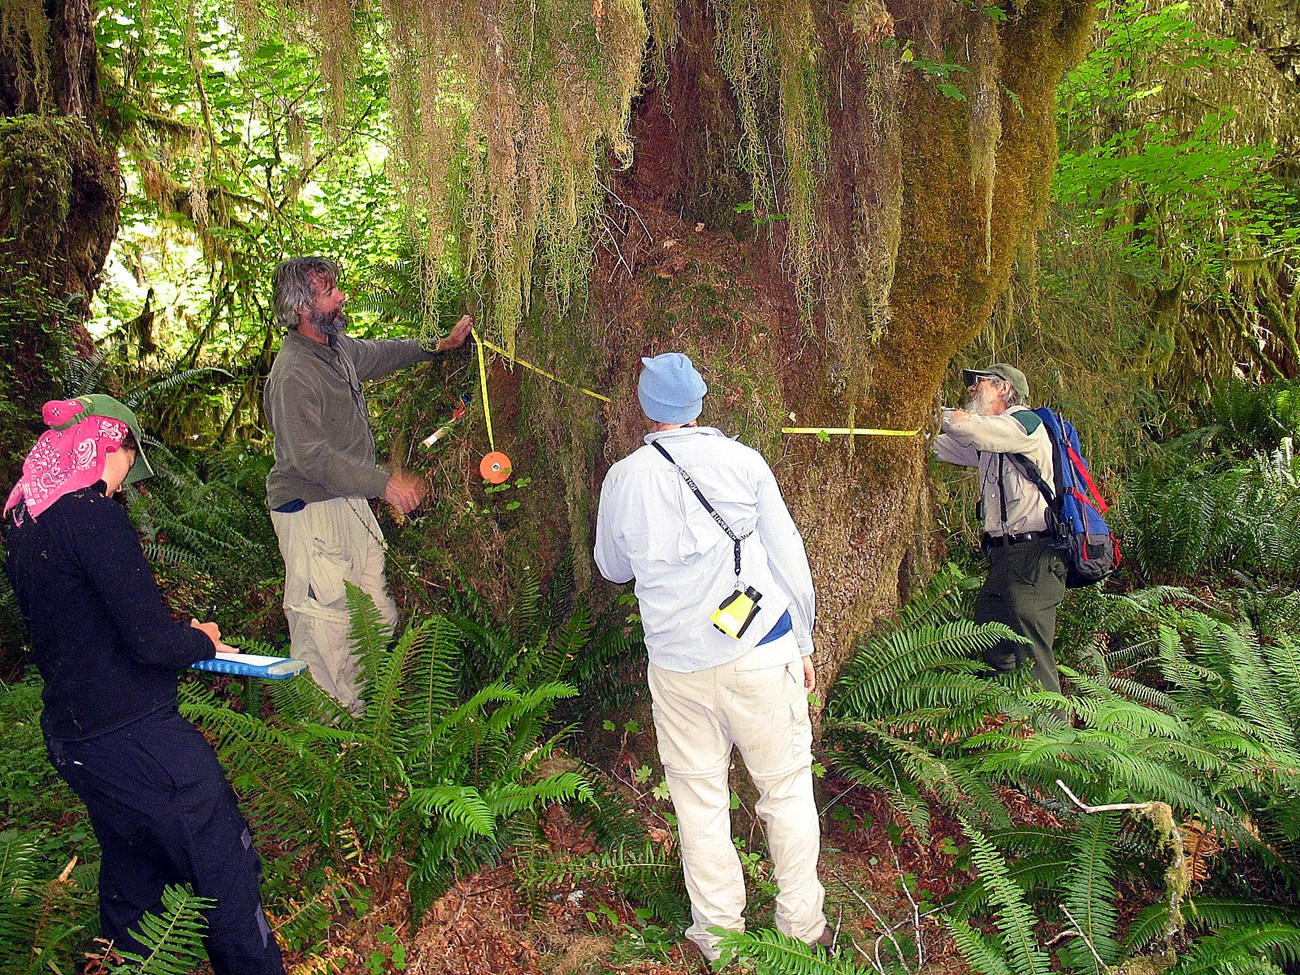 Four people in a lush, mossy forest, measuring a tree with a measuring tape. One is writing on a notebook.